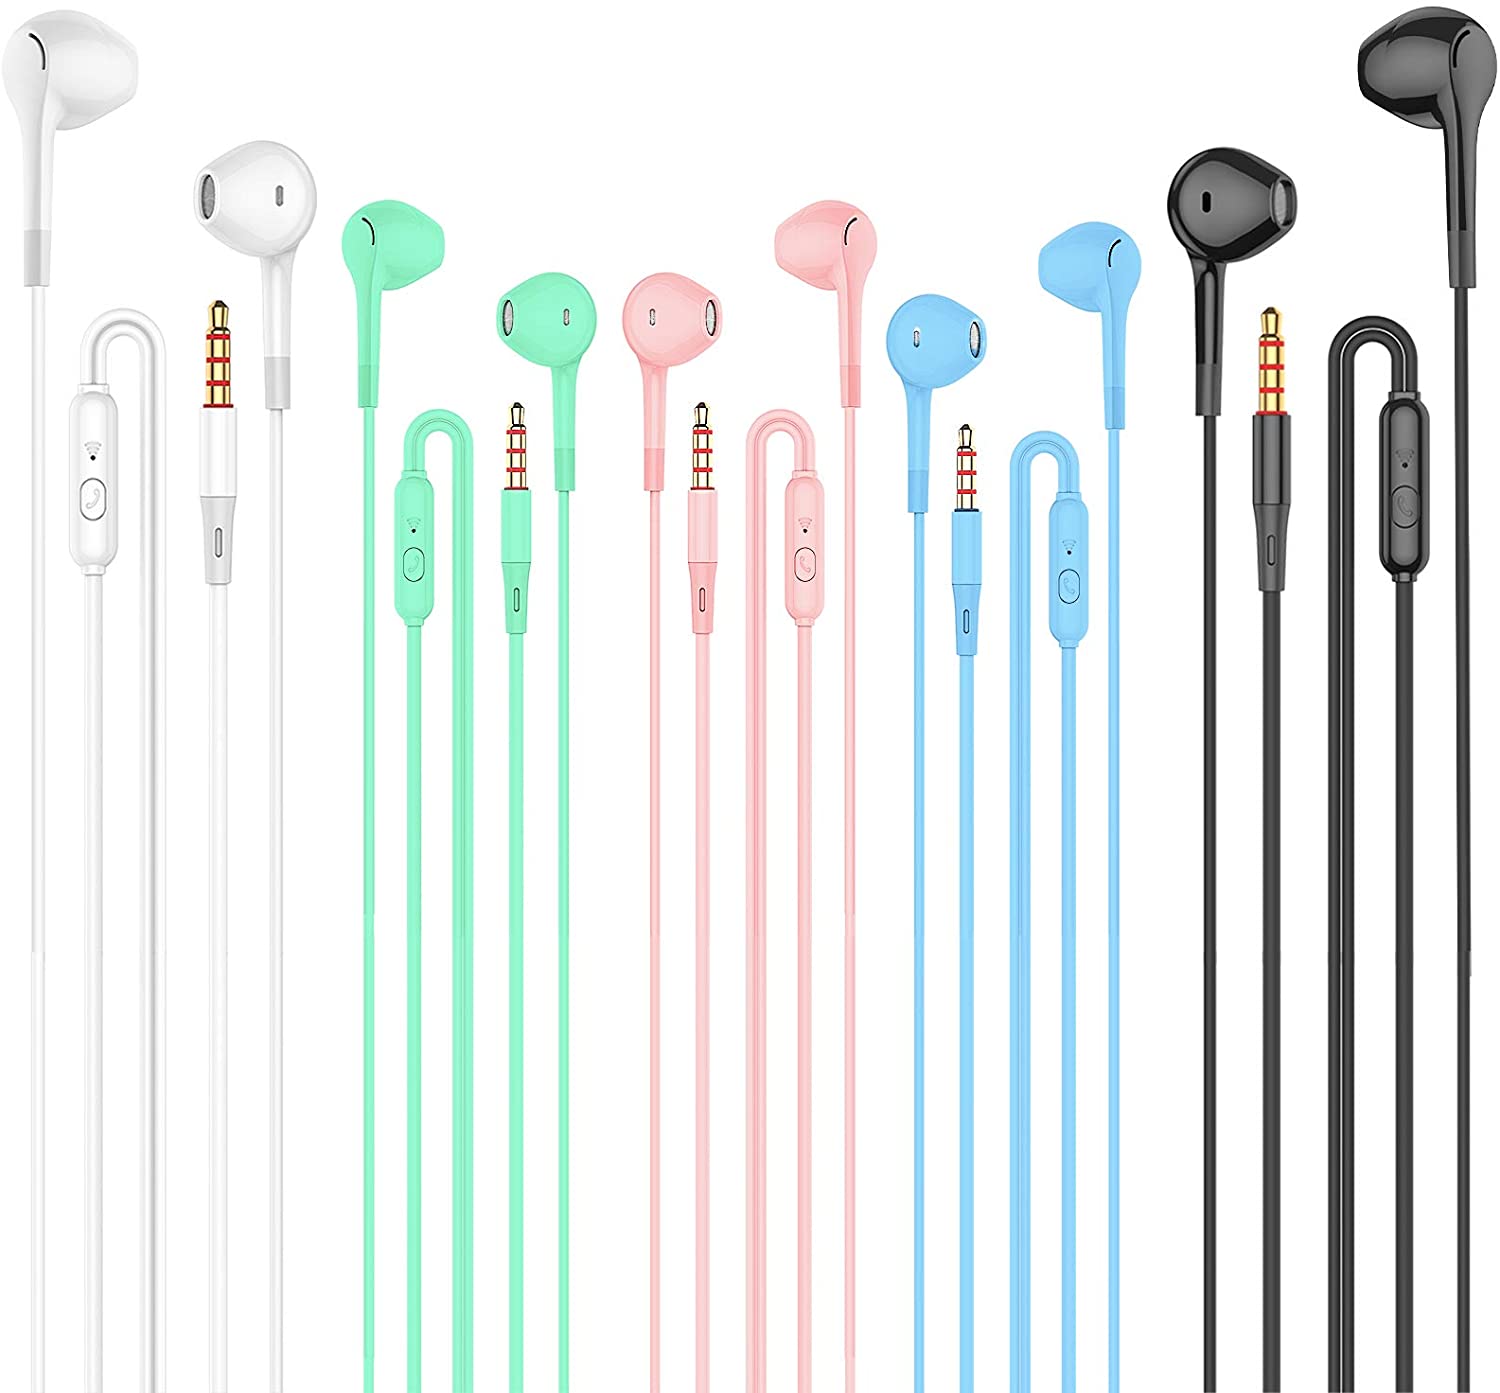 HUOMU Multi-Device Wired Earphones, 5-Pack